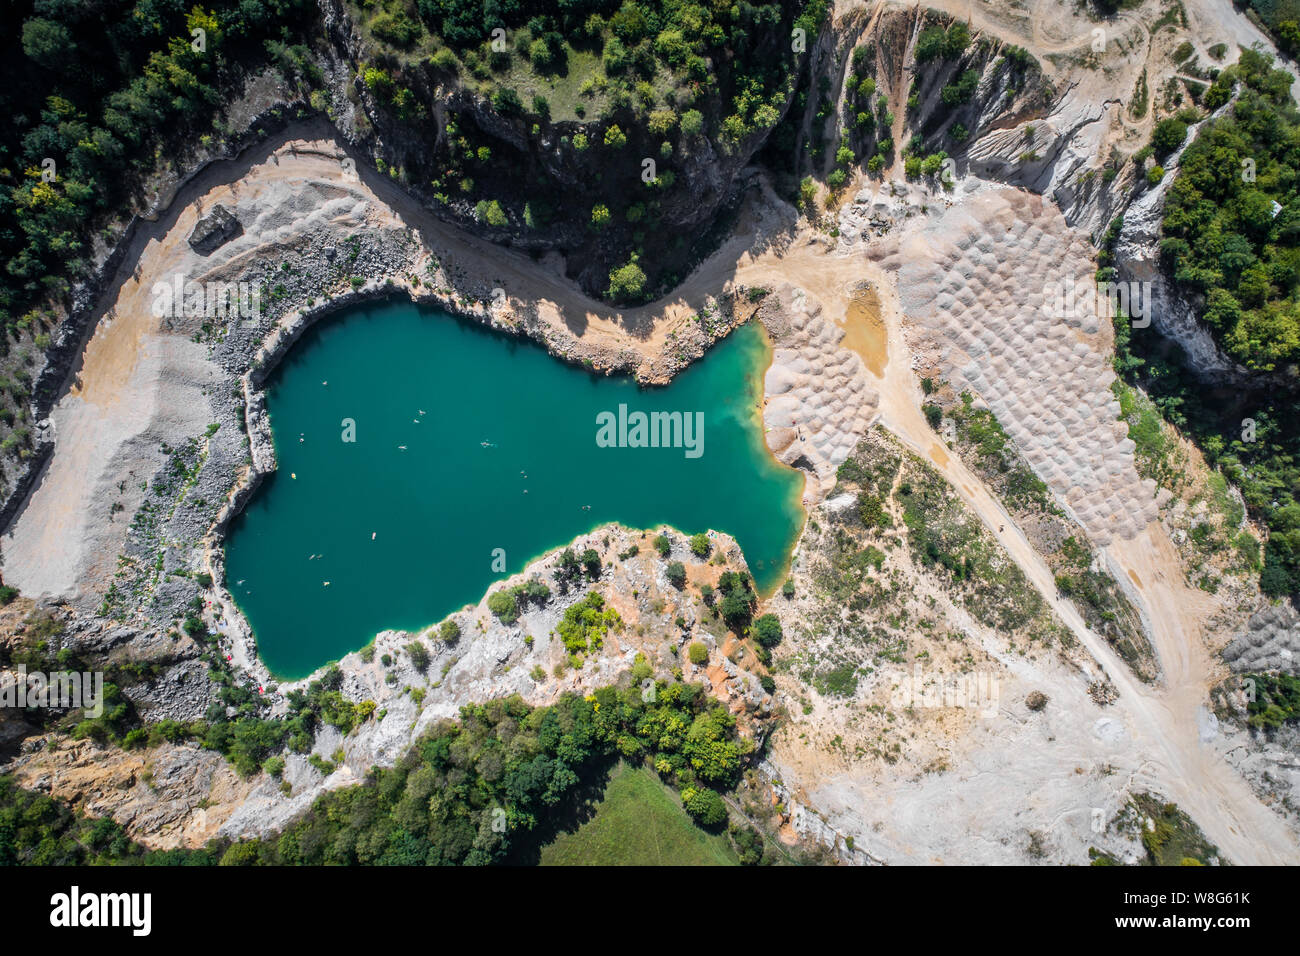 The quarry was opened in 1918 and over the course of the 20th century it gradually expanded its area by merging with the surrounding smaller quarries. Stock Photo